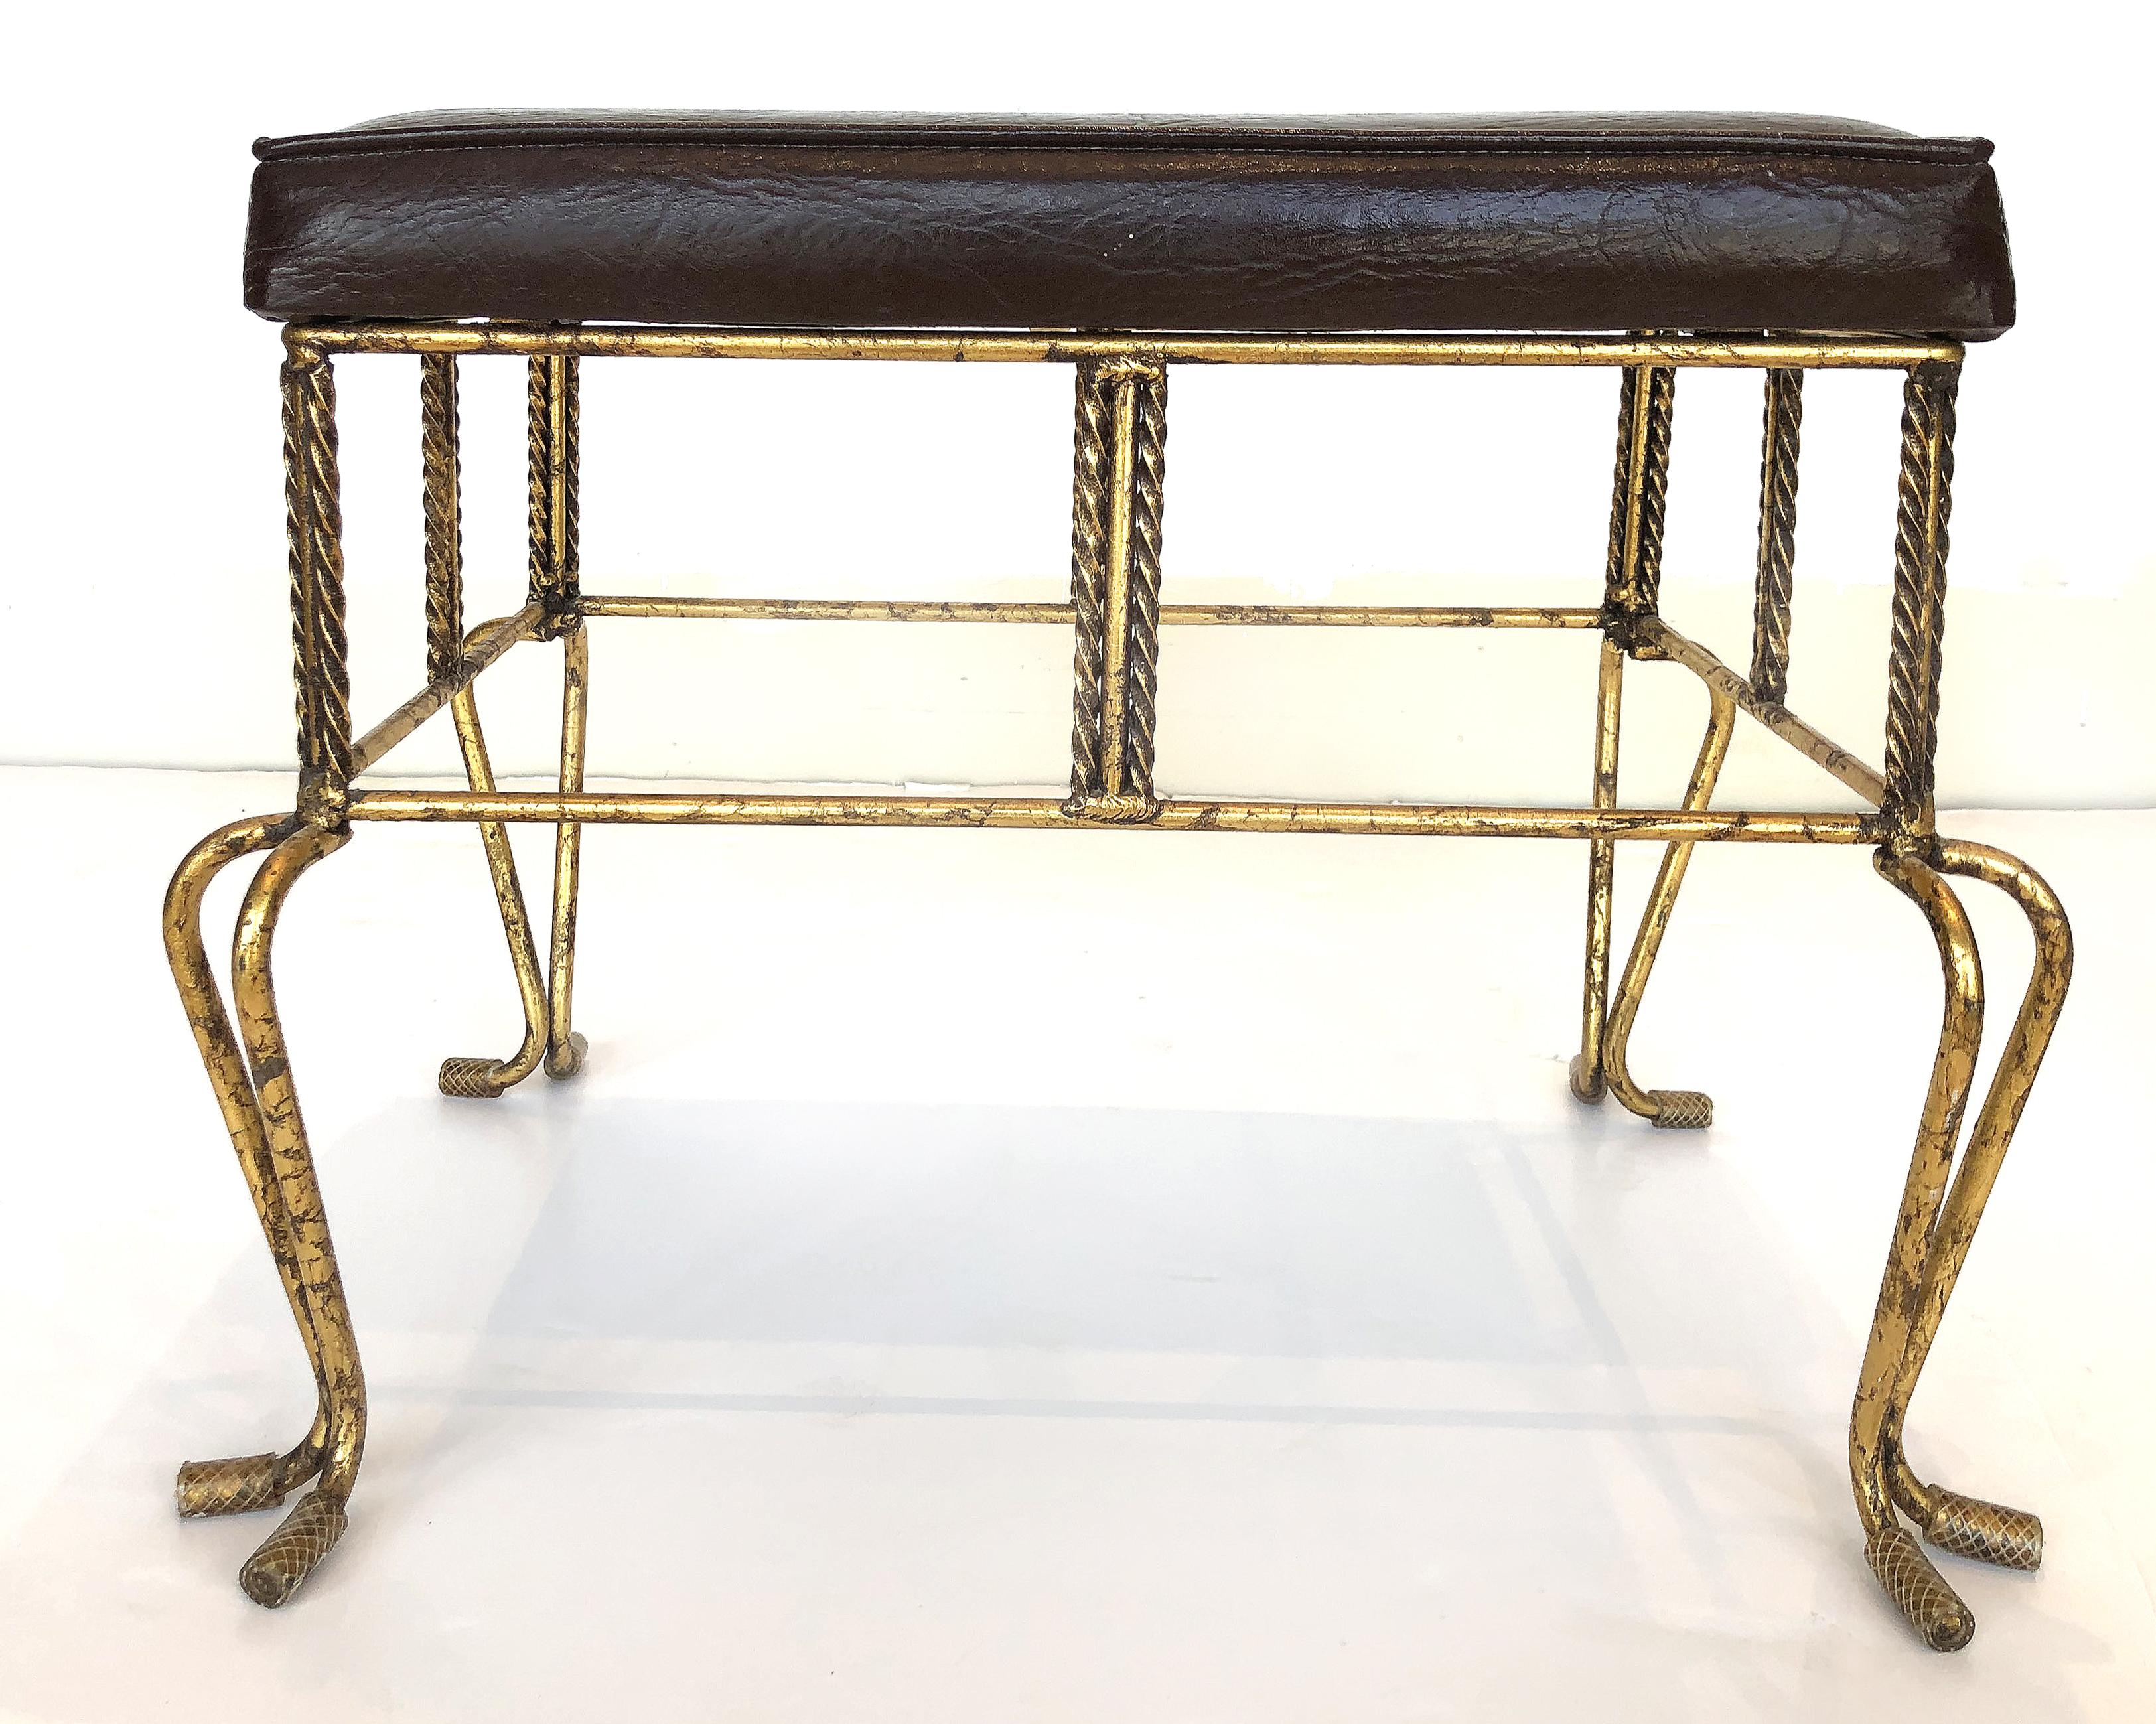 1960s European Hollywood Regency gilt-iron bench / stool


Offered for sale is an upholstered 1960s European Hollywood Regency gilt-iron bench or stool created in the manner of Tony Duquette. The bench is quite substantial while having an elegant